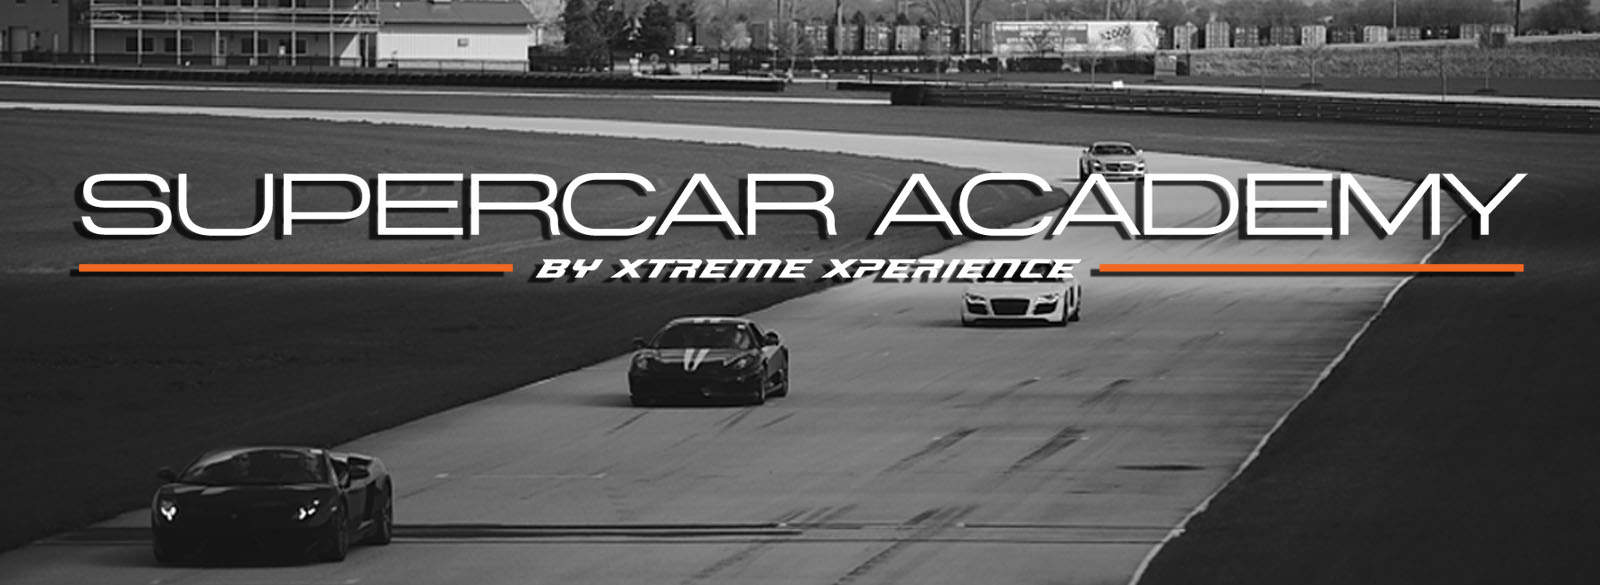 The Supercar Academy by Xtreme Xperience